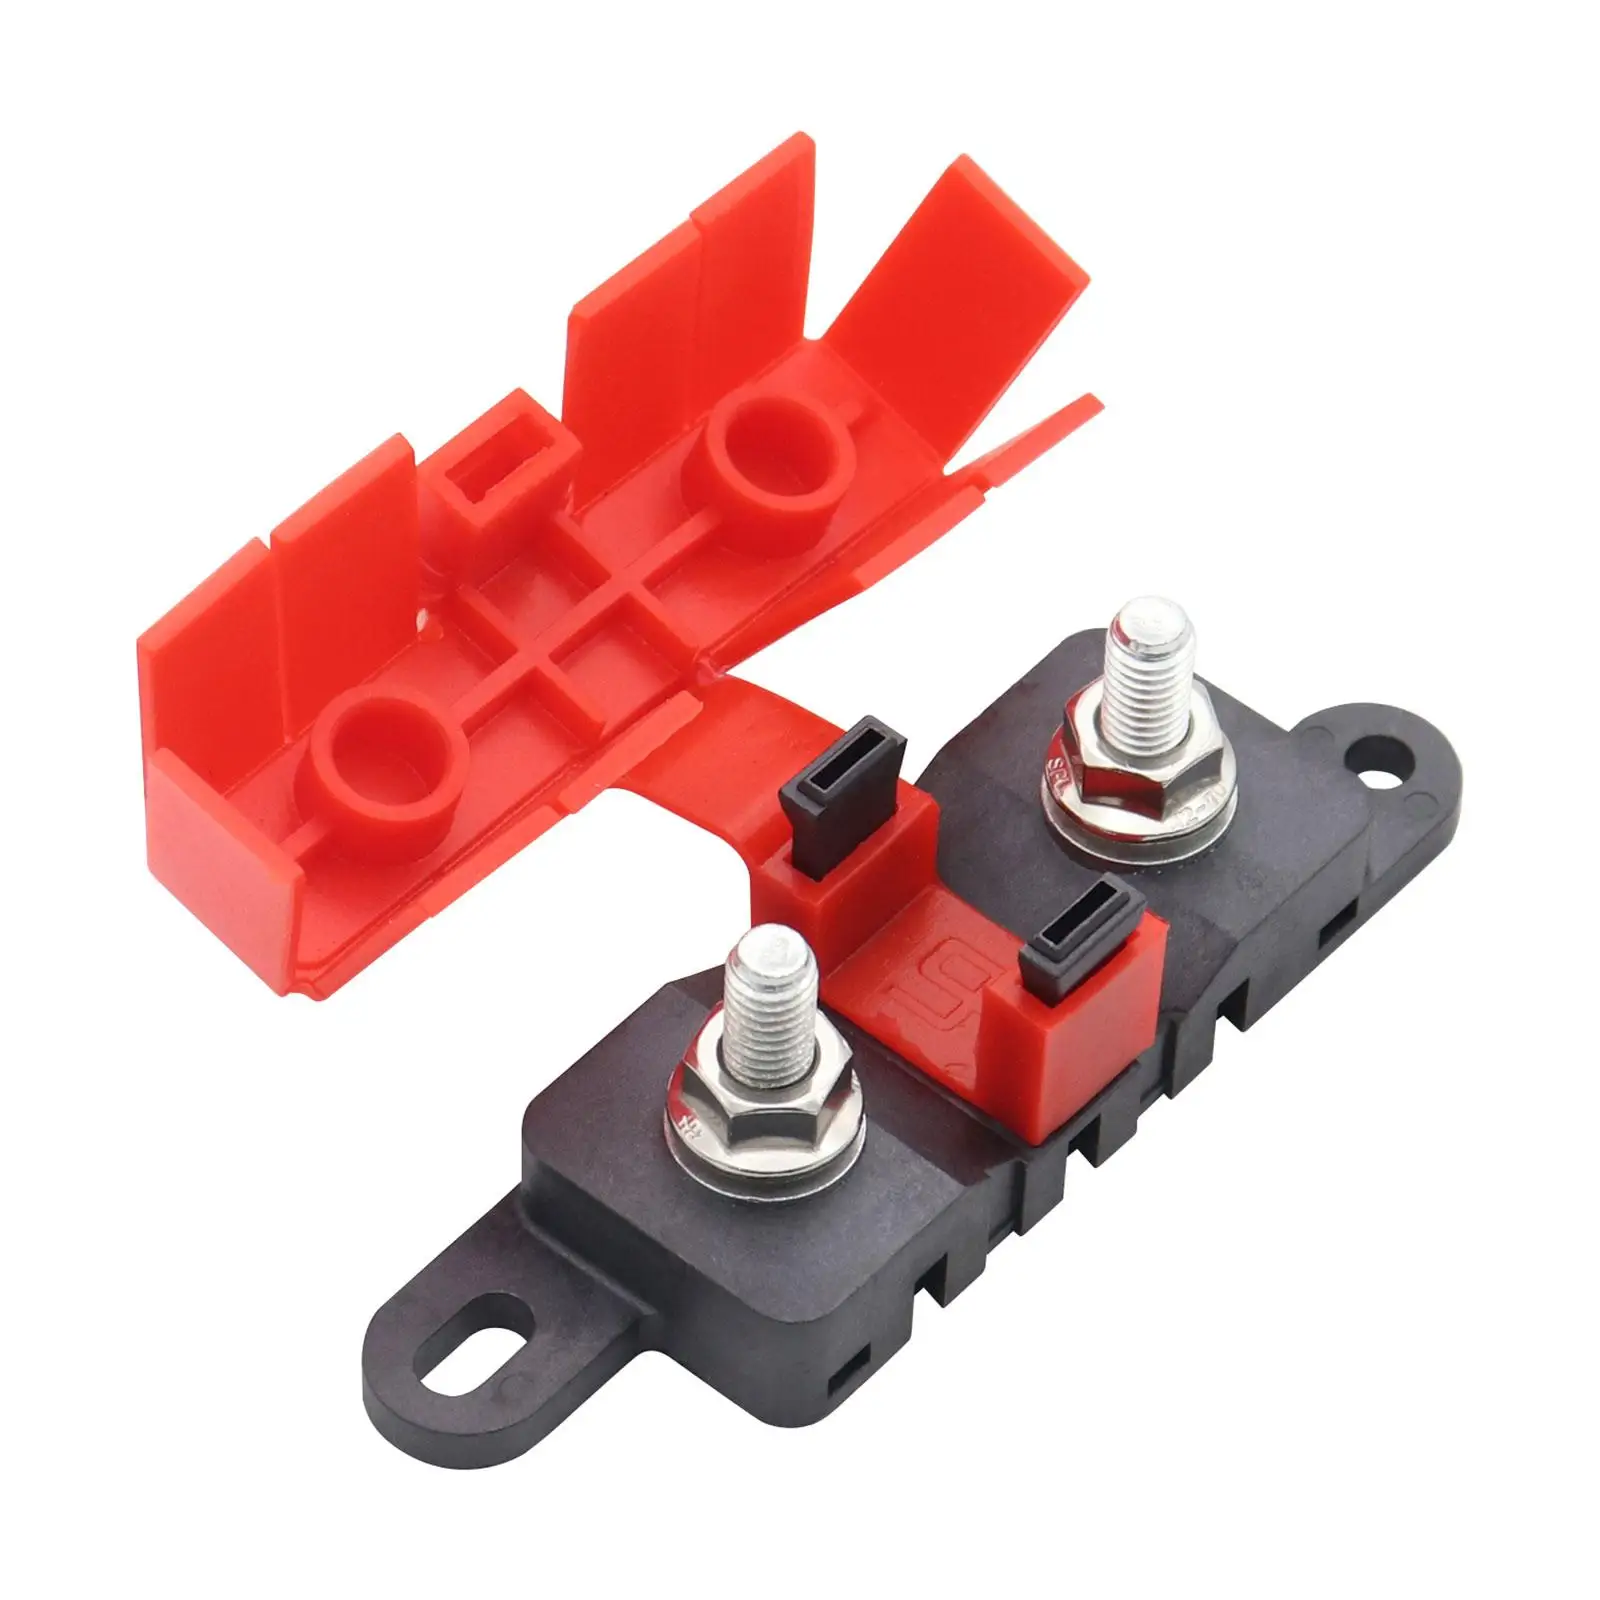 Auto Fuses Holder 500A 70V DC with Protective Cover Bdfm Fuse Box Screw on Fuse Holder for Car Motorhome Automotive RV Boat